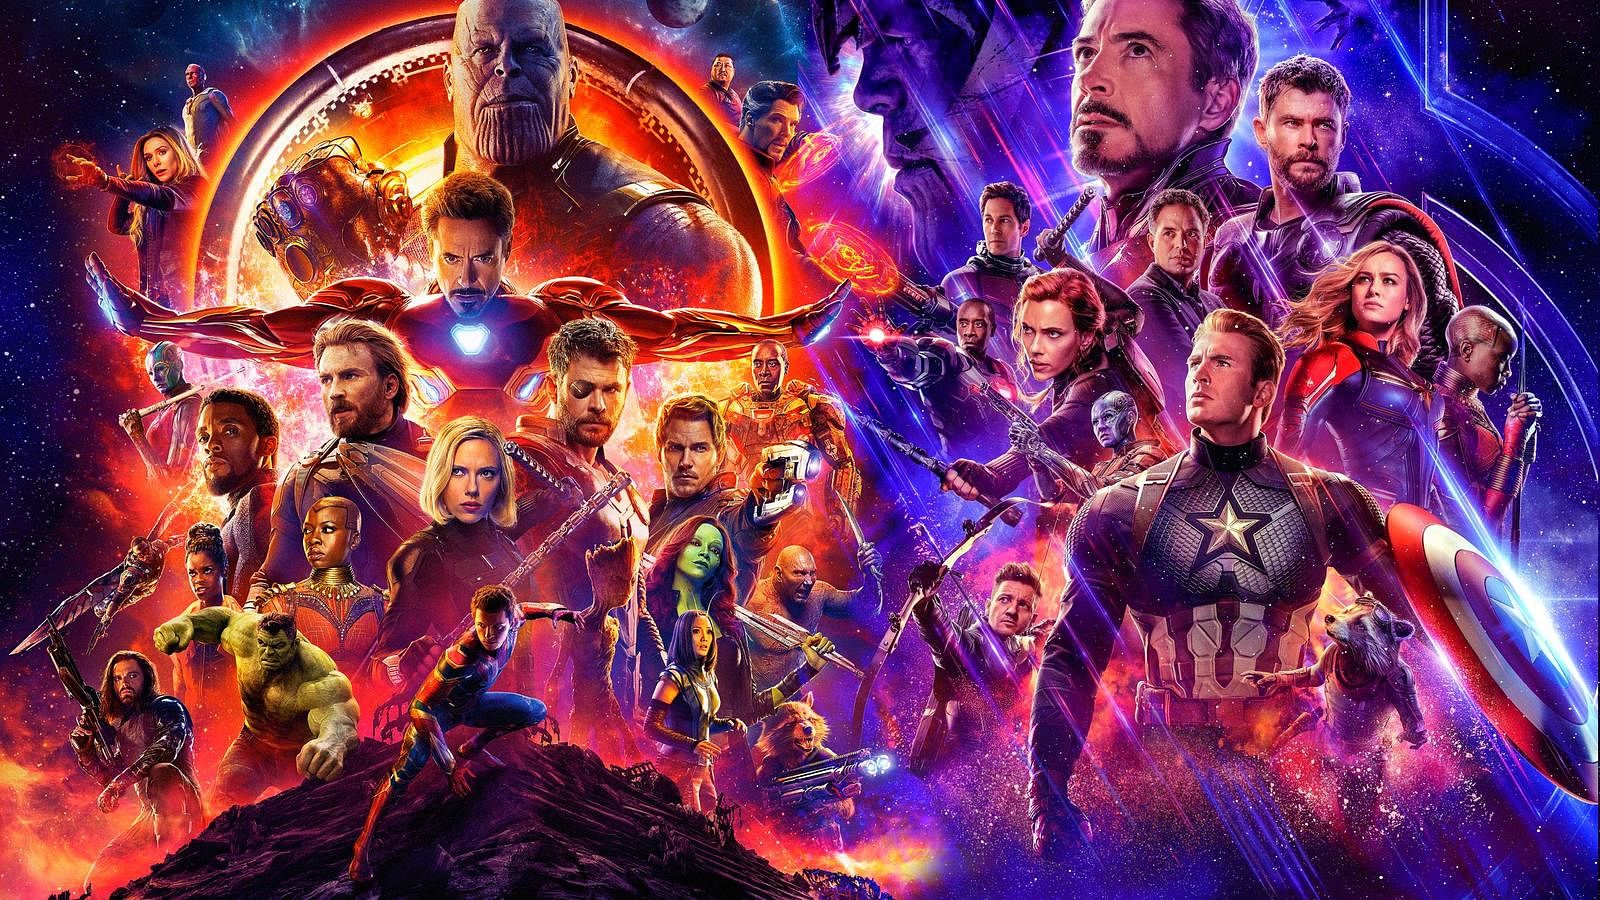 <i>Avengers: Endgame</i> brings to a close a saga that has spanned 11 years and 22 films.